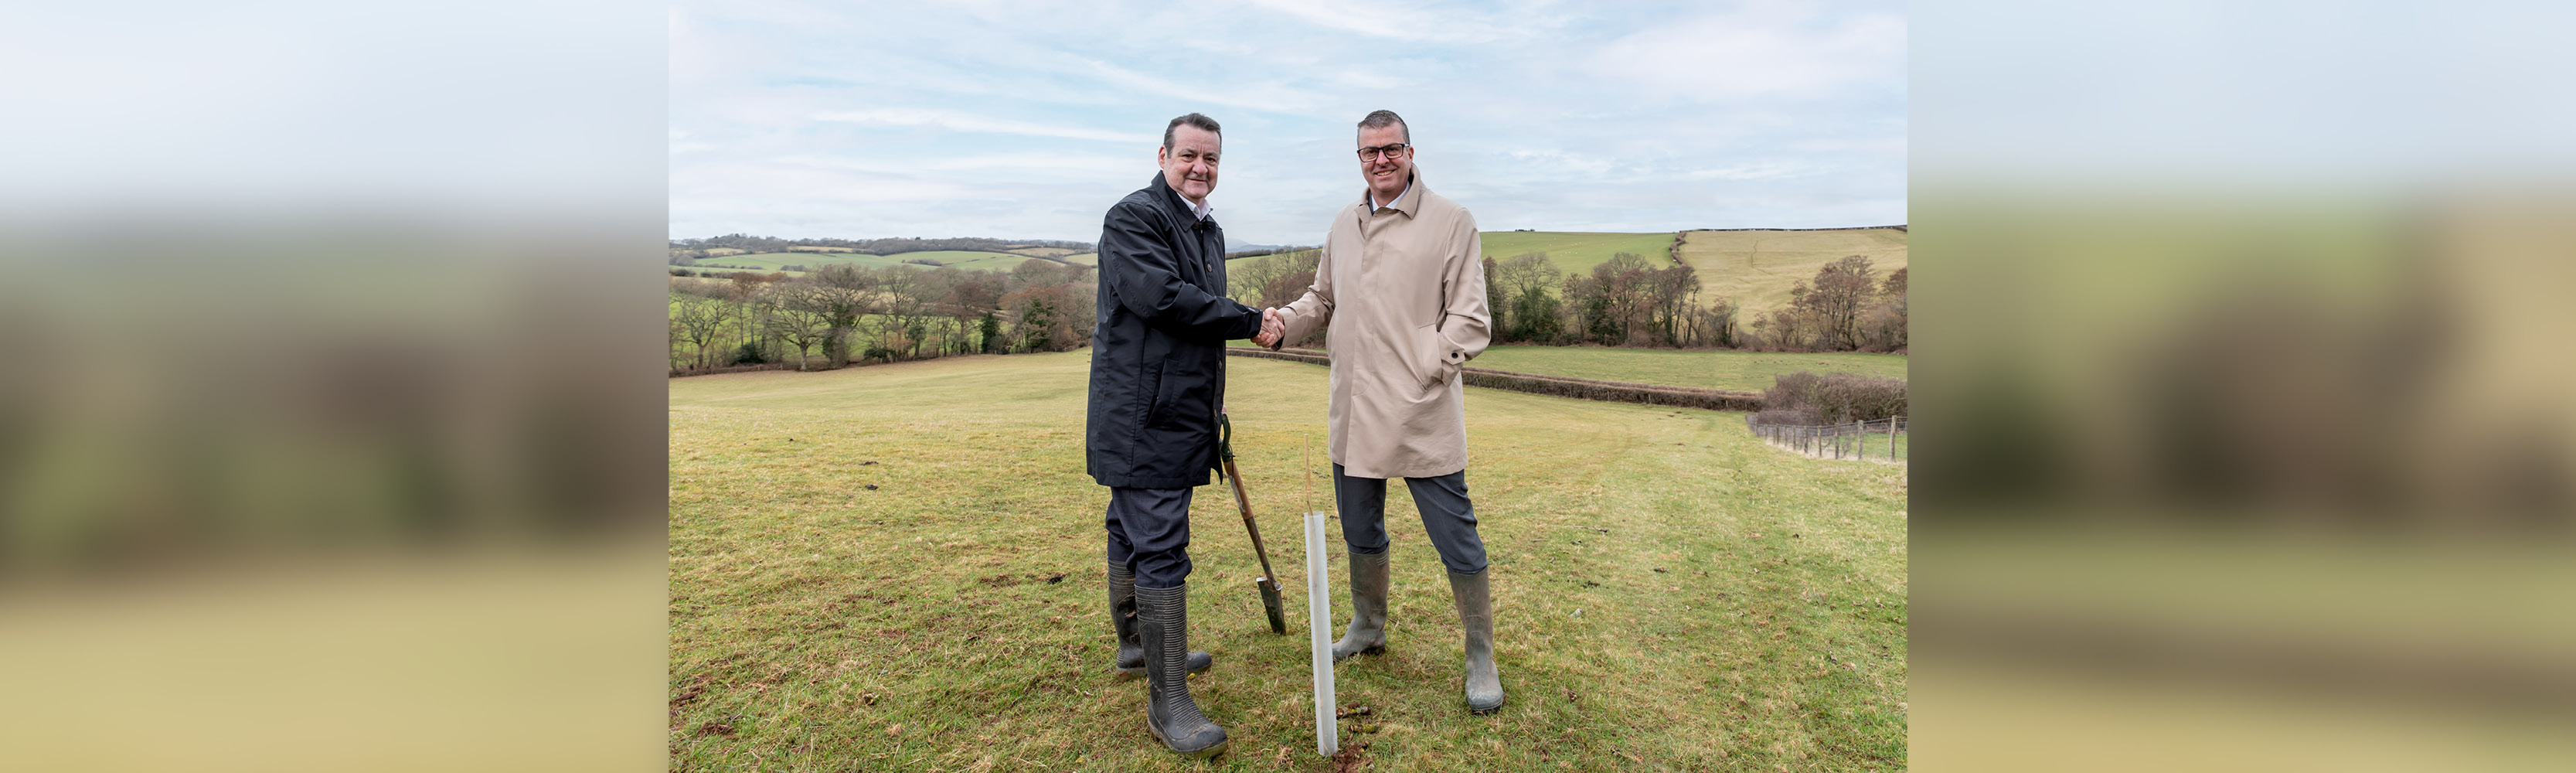 Final tree planted in Thorlux woodland